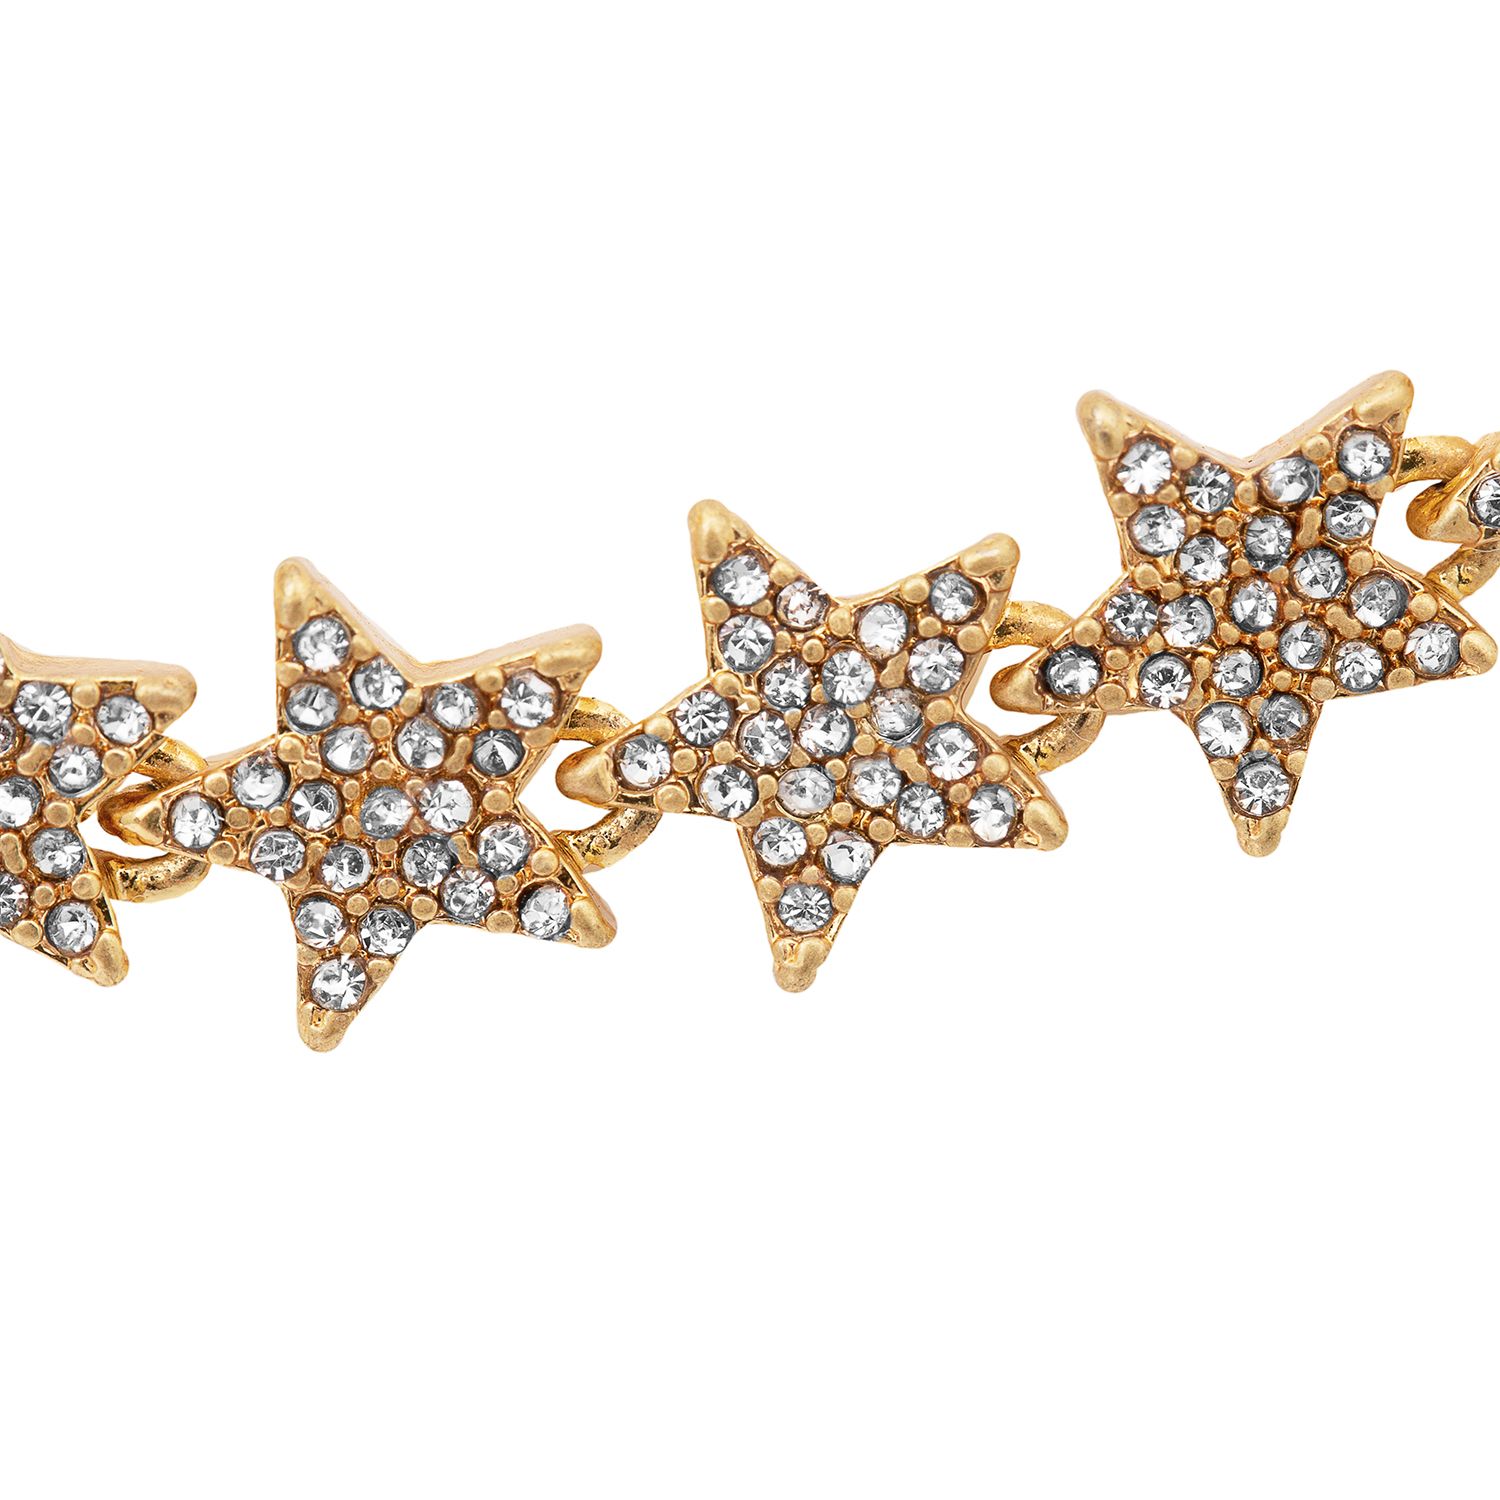 The Kate Thorton Sparkling Stars bracelet looks stunning with a day time chunky knit look on its own, and you can really bring the glamour by teaming it up with the matching necklace and earrings too. The tennis style bracelet is gold plated and adorned with pave clear stones across every star, and it comes with an extender too. A classic look with a cool twist, fans of sparkle and celestial jewellery will love this piece!